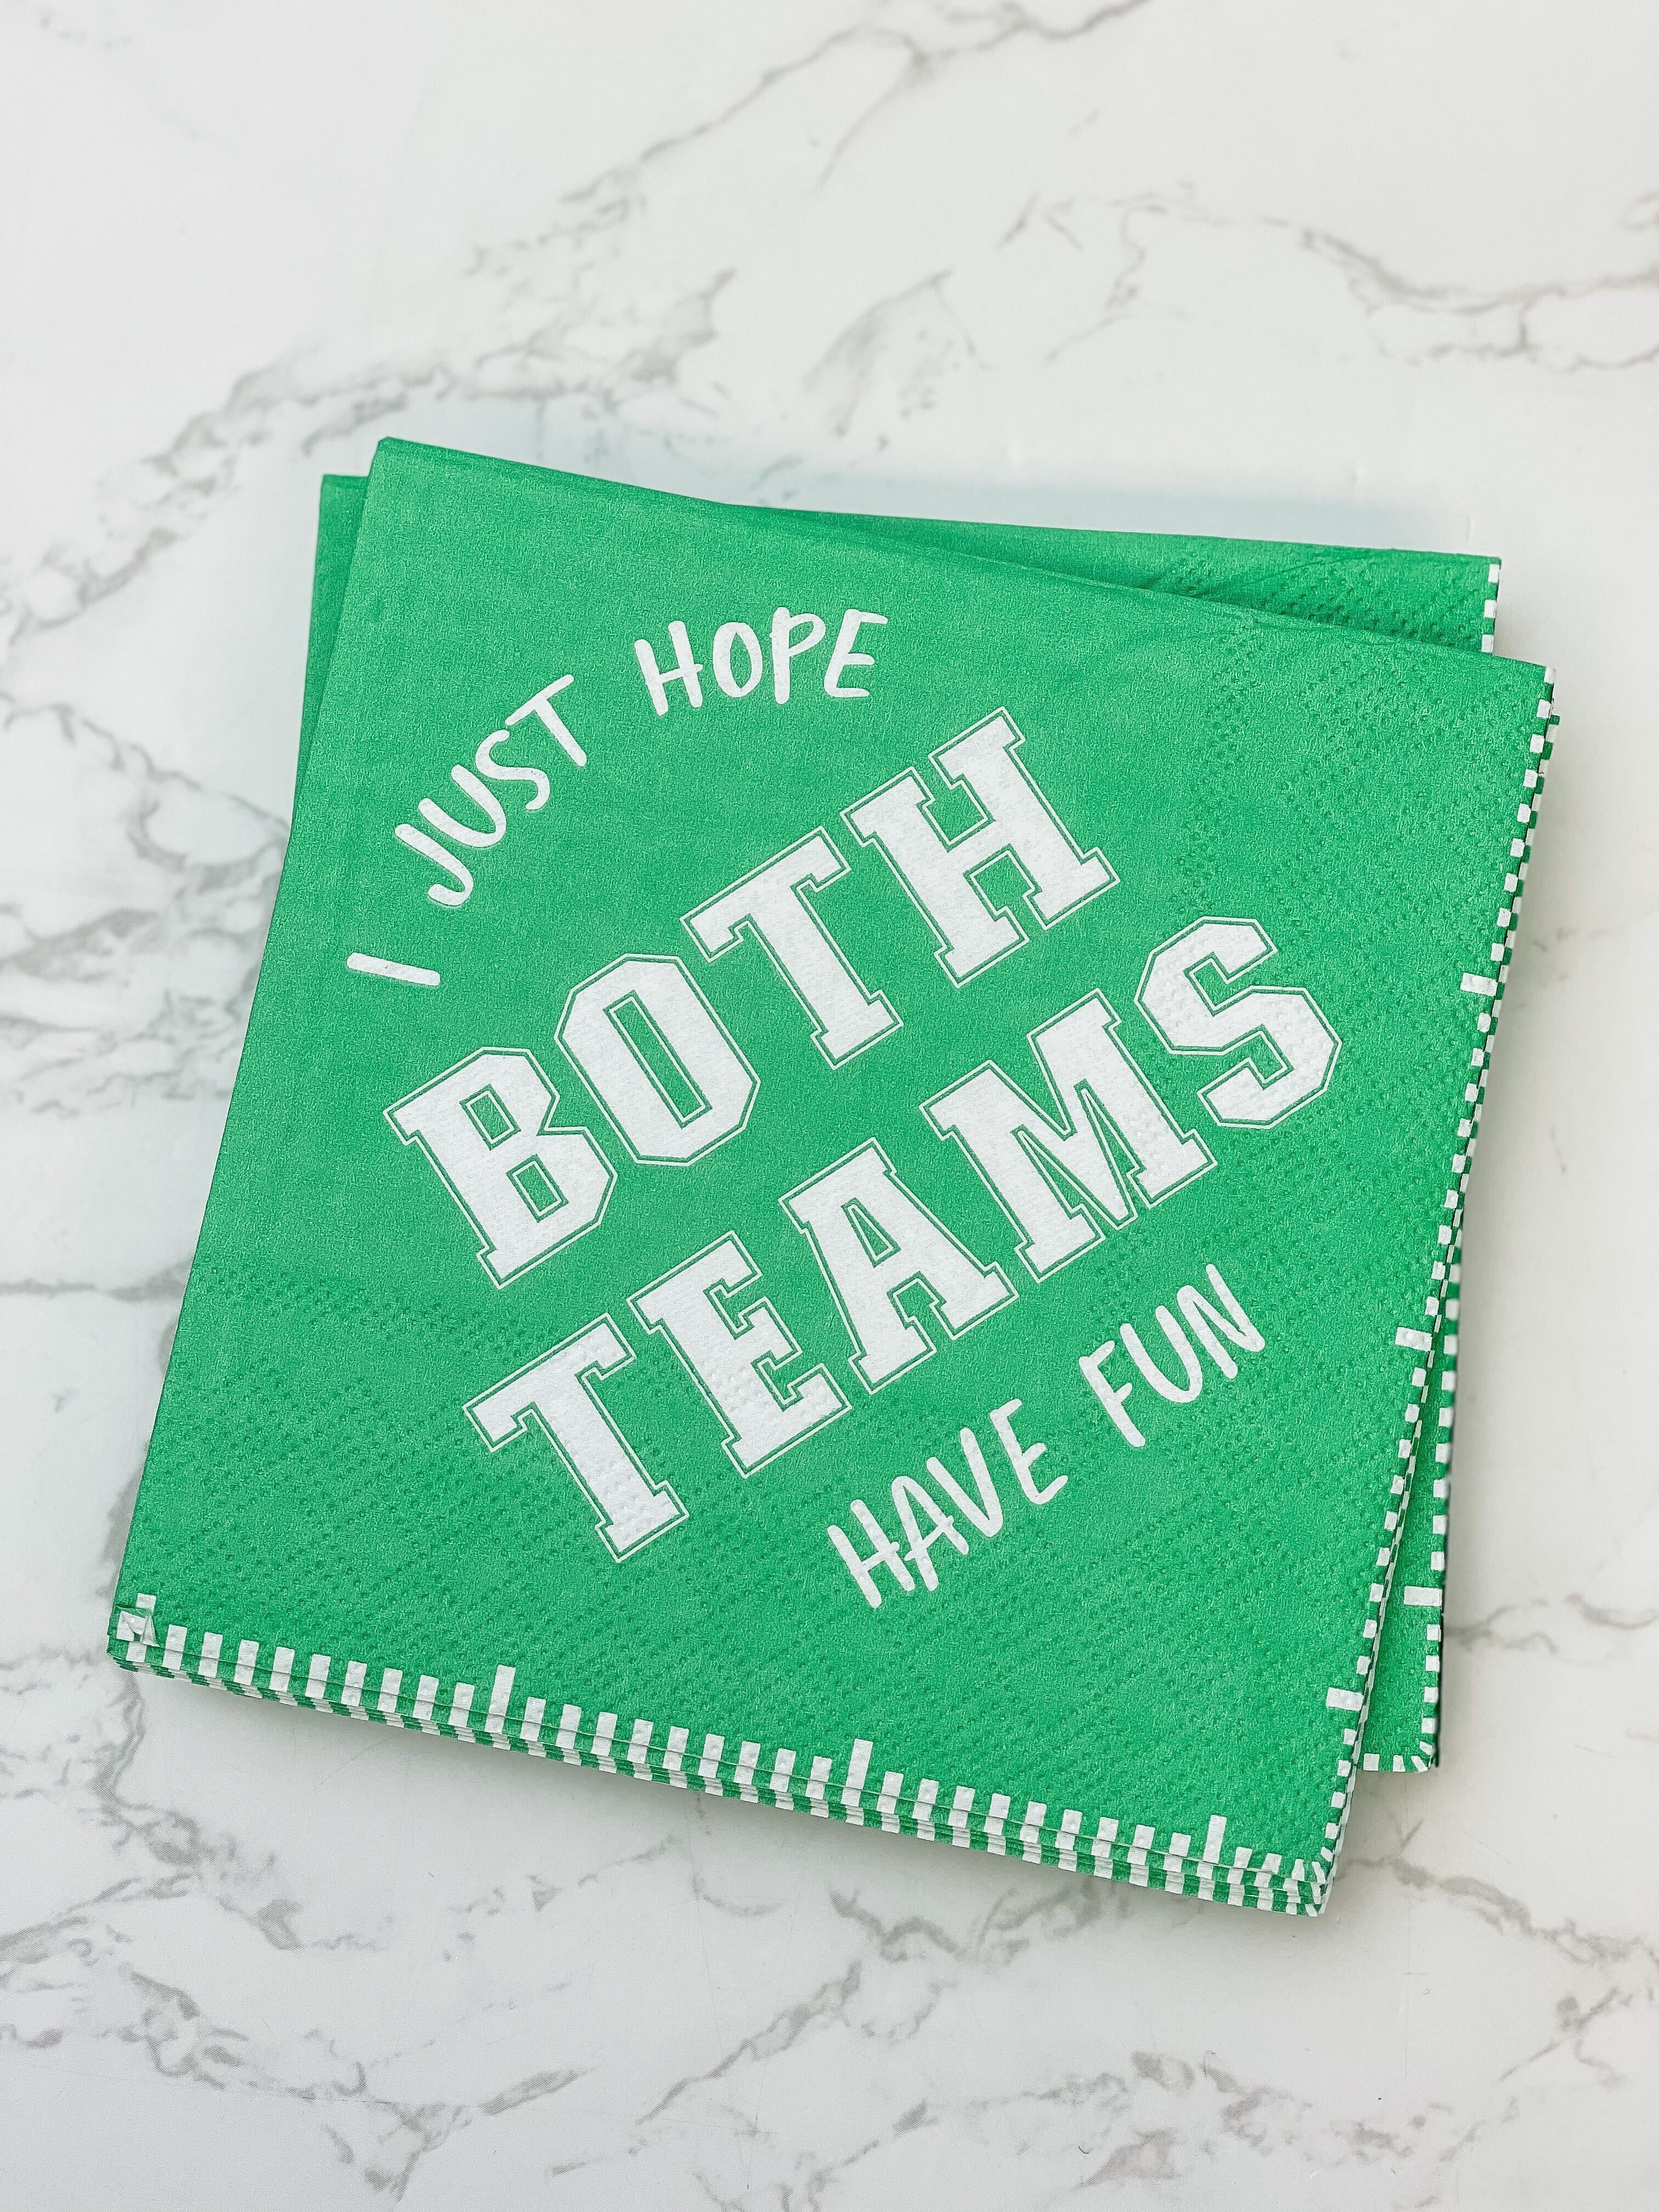 'I Just Hope Both Teams Have Fun' Football Cocktail Party Napkins